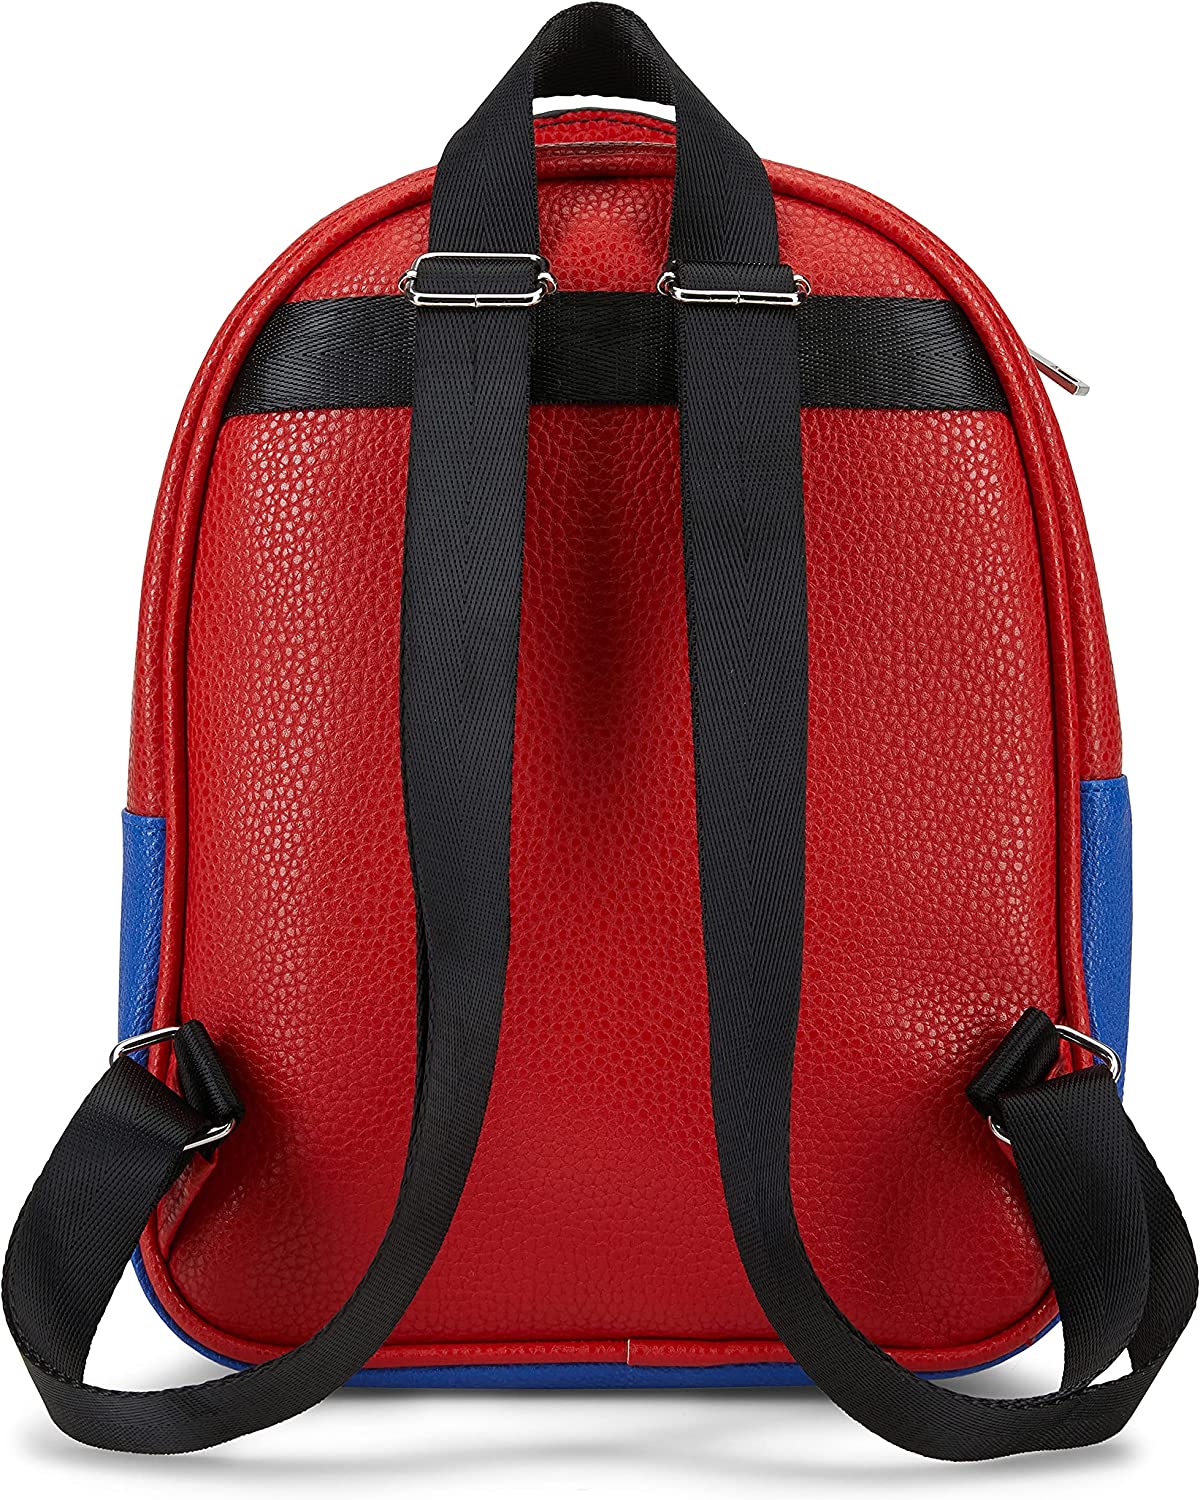 Nintendo's Super Mario Cosplay 10.5 Backpack, Faux Leather PU with 3D Features, Red & Blue - image 2 of 6